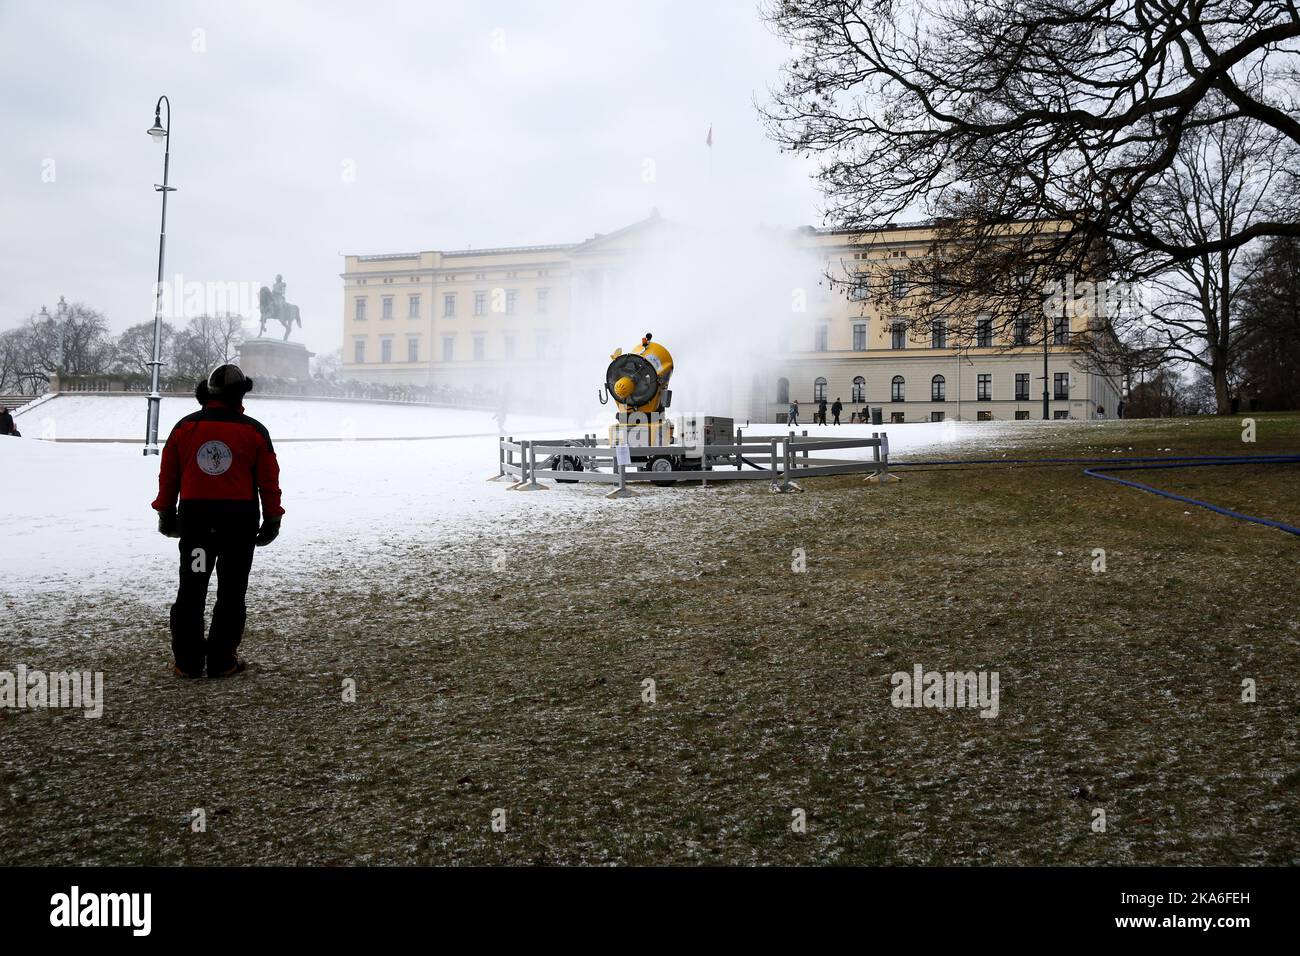 OSLO, Norway 20160104. Today's picture of NTB scanpix. A snow canon produces snow on Slottsplassen (Palace Square) in Oslo. The snow is made to an event in conjunction with Kong Harald and Queen Sonja's 25th anniversary as king and queen of Norway. Photo: Cornelius Poppe / NTB scanpix Stock Photo